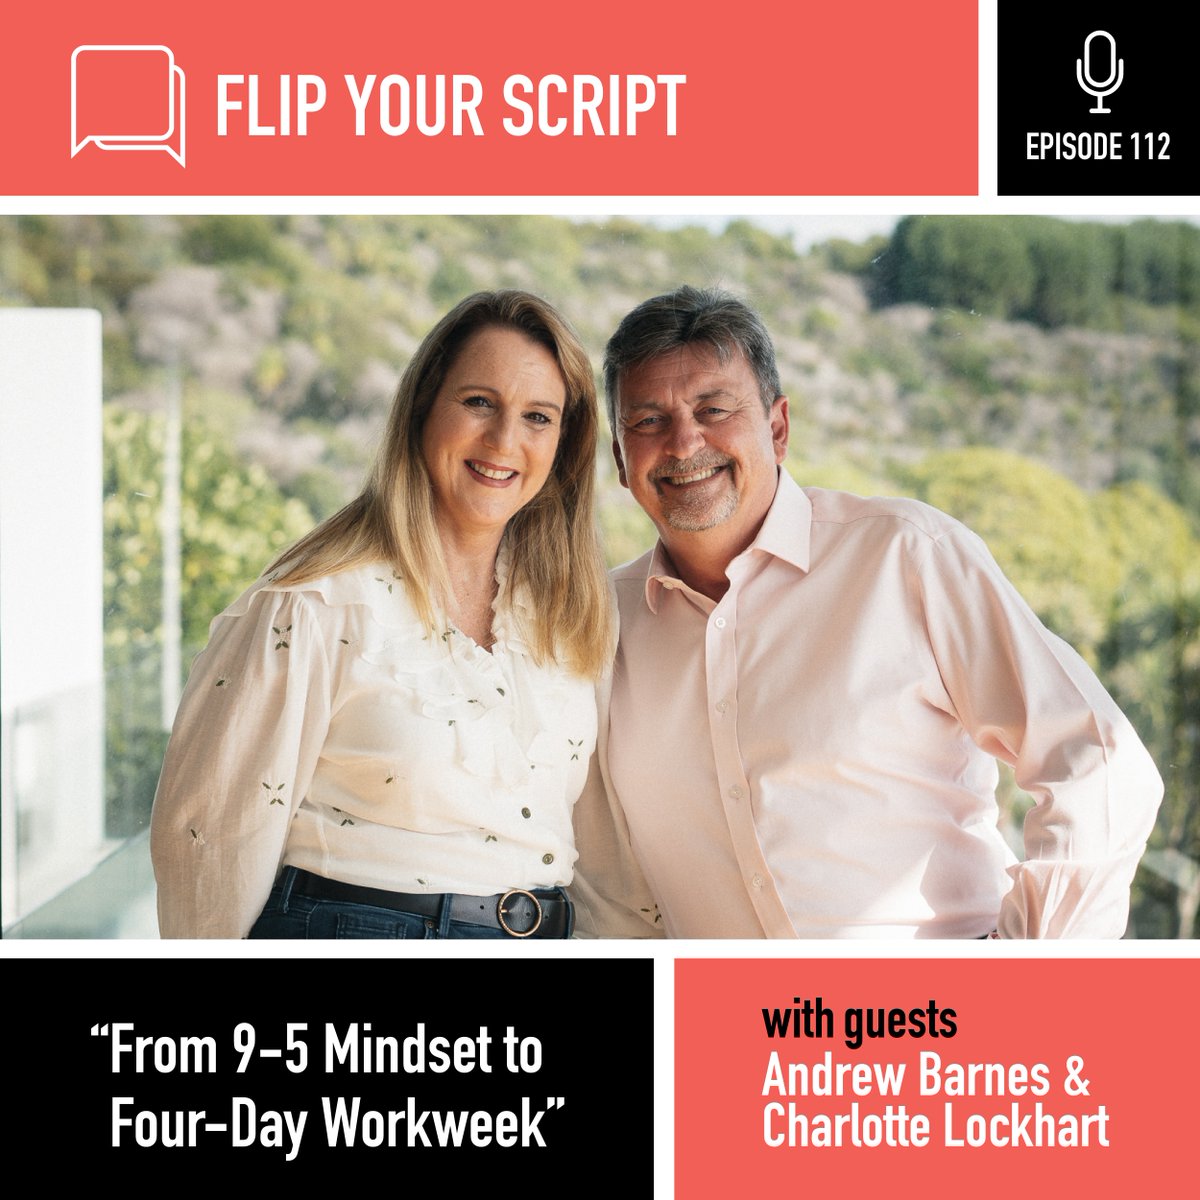 Our team is more productive, creative and coming to work with clear minds and fresh perspectives all thanks to our 4-day mindset. Is it time to Flip Your Script when it comes to the workweek? 🔗 bit.ly/3fw2erf @andrewhbarnes @lockhart_charli @4dayweek_global @kristipiehl